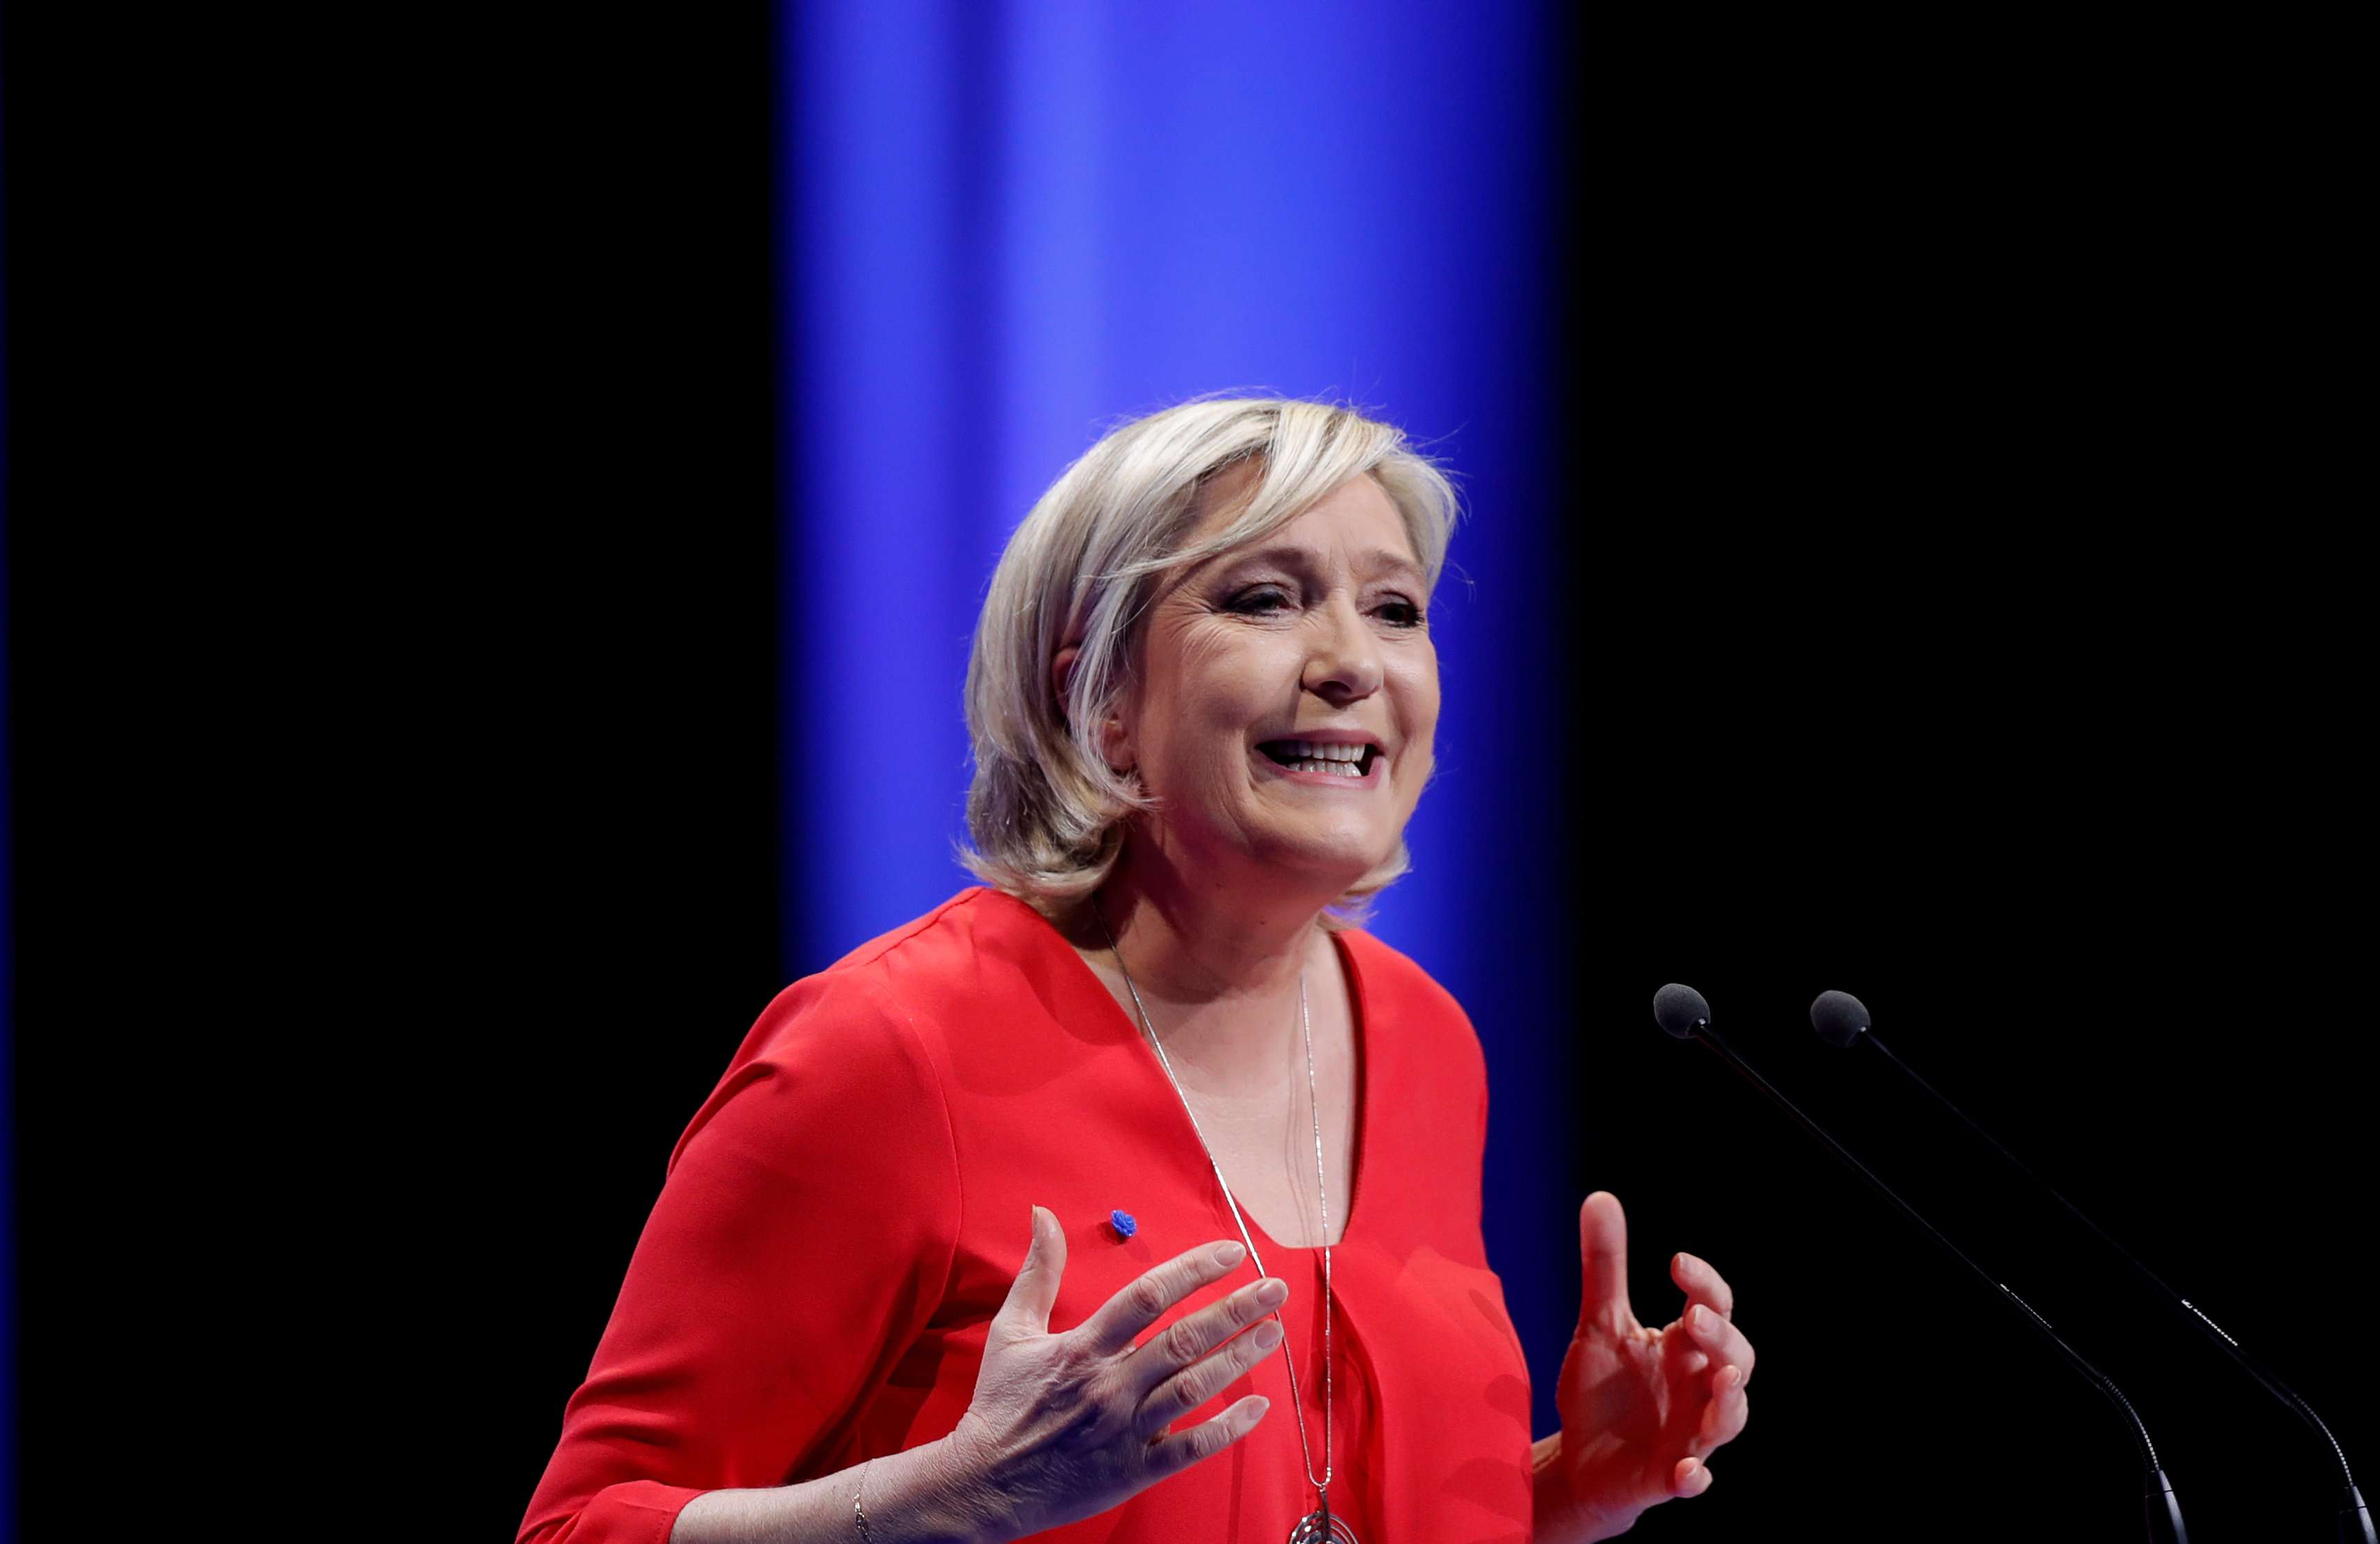 Marine Le Pen, French National Front political party leader and candidate for French 2017 presidential election, attends a political rally in Chateauroux, France. Photo: Reuters